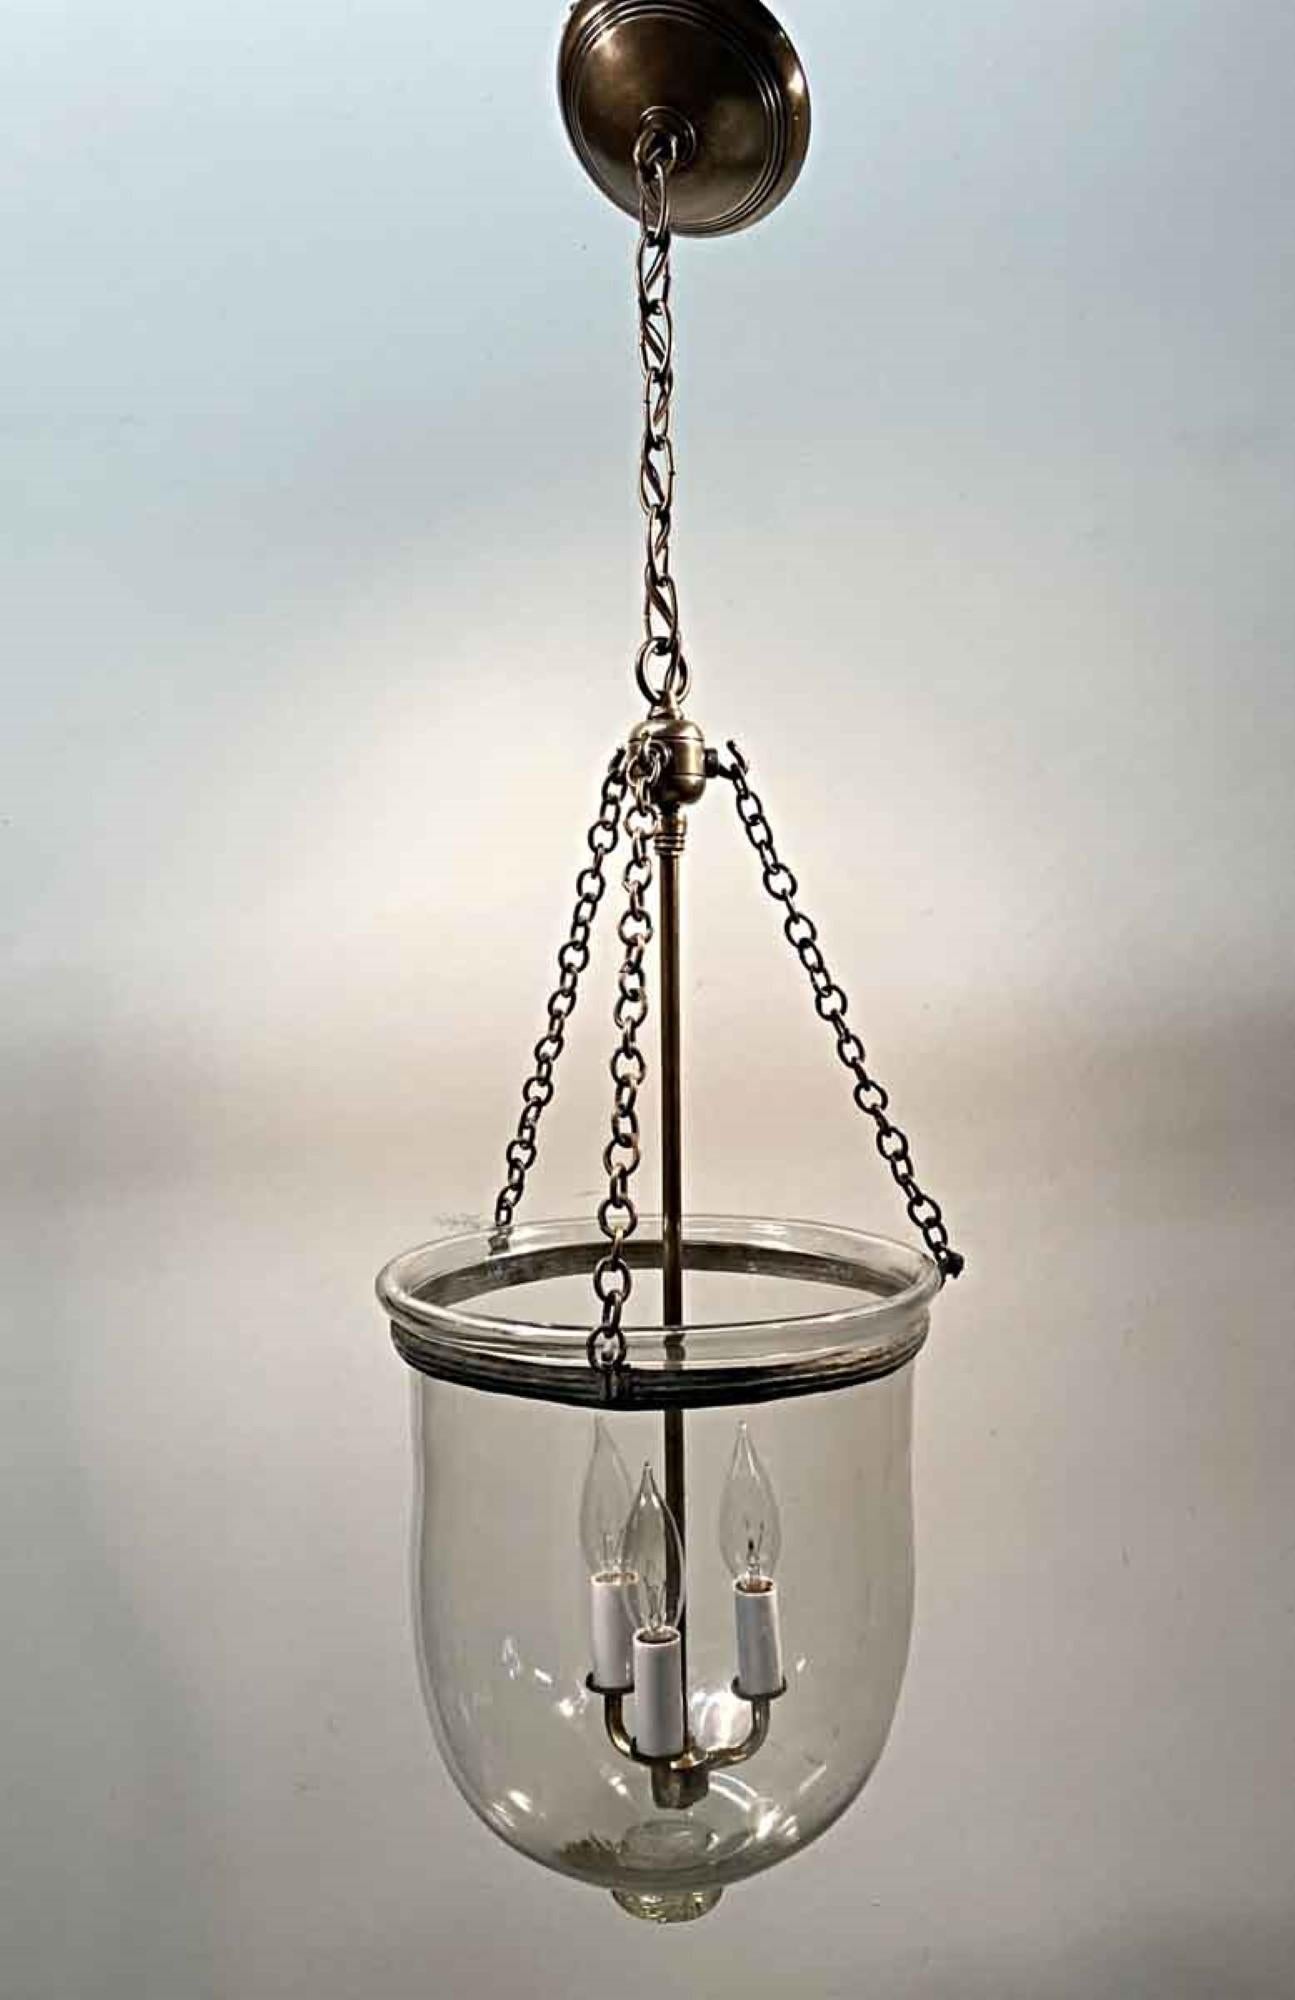 1890s English hand blown glass bell jar lantern with clear glass, newly made brass hardware. Features three candelabra lights. Price includes restoration. This can be seen at our 400 Gilligan St location in Scranton. PA.